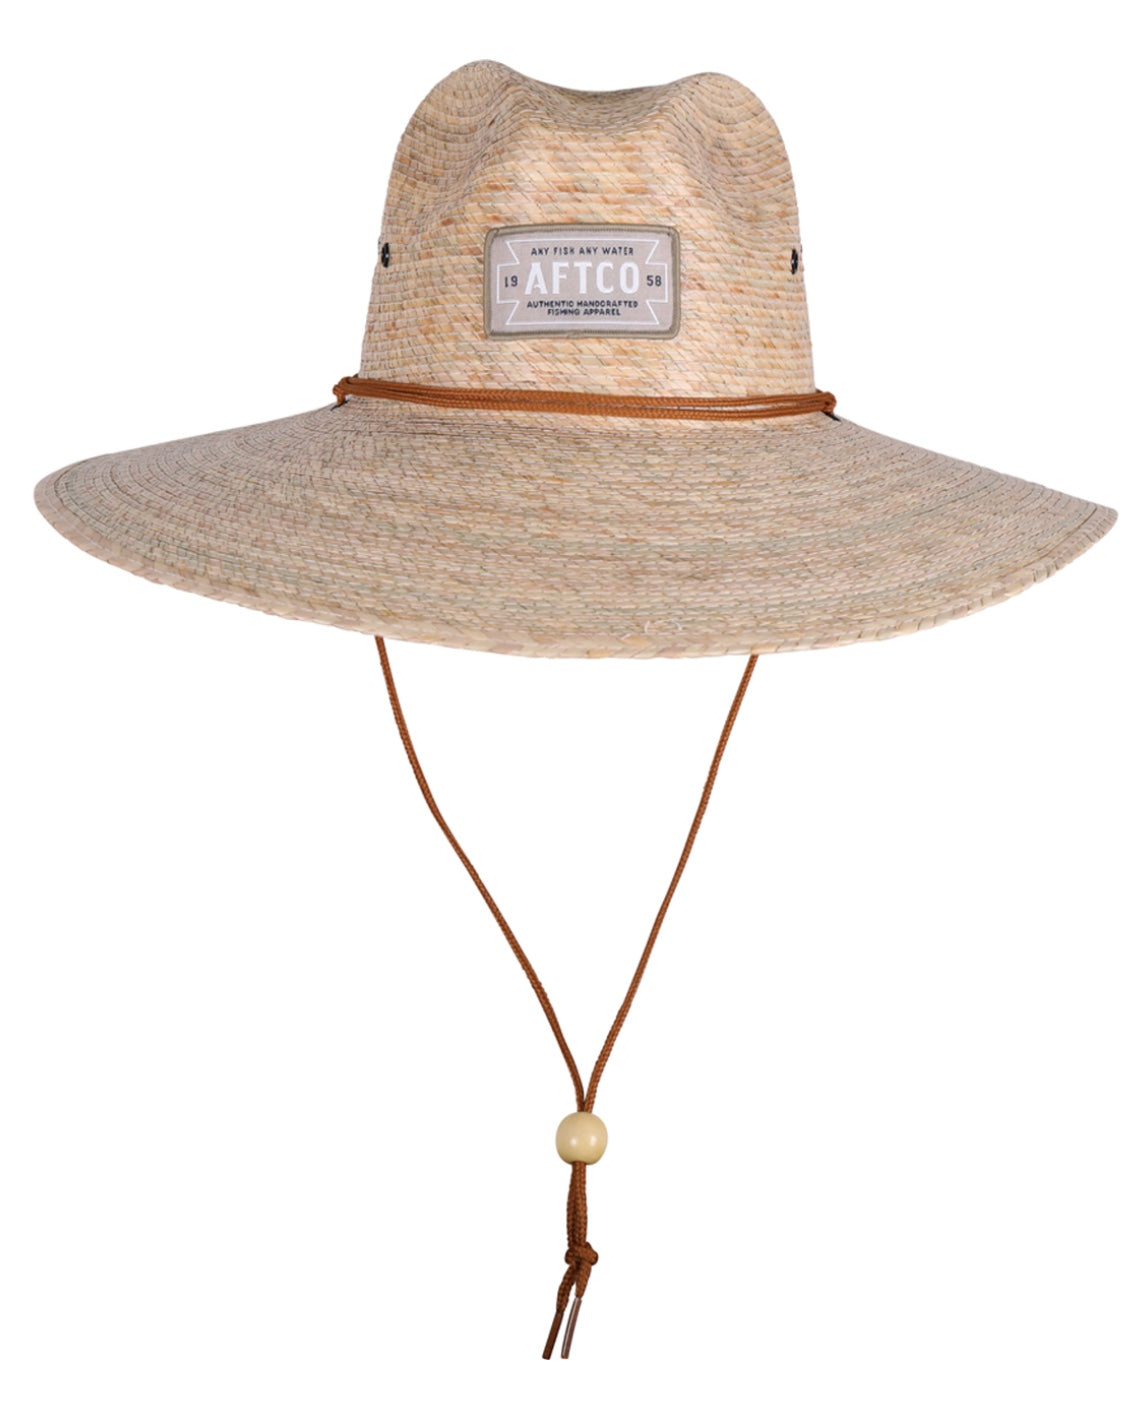 AFTCO TOP CASTER STRAW HAT